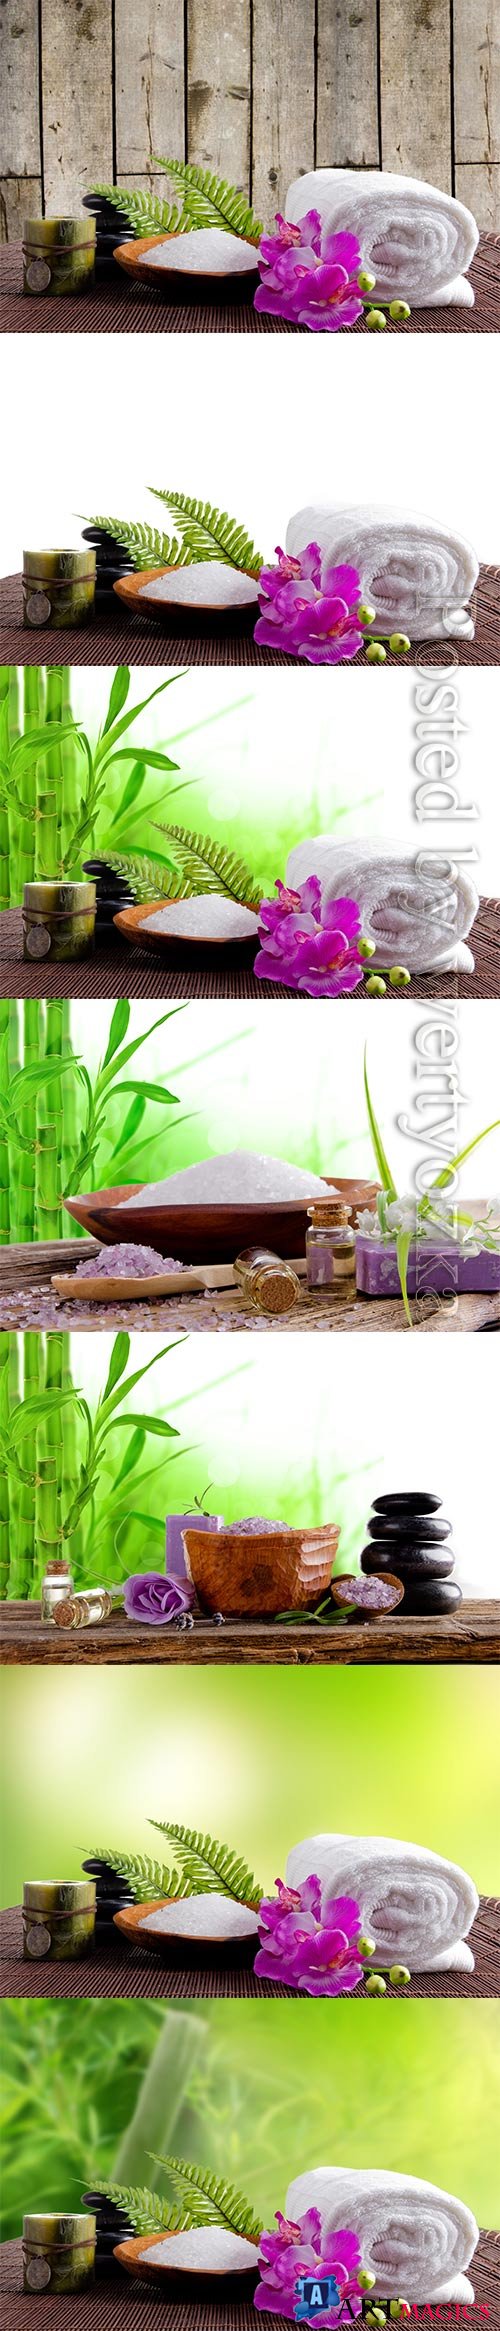 Spa backgrounds with bamboo branches, spa stones and orchids